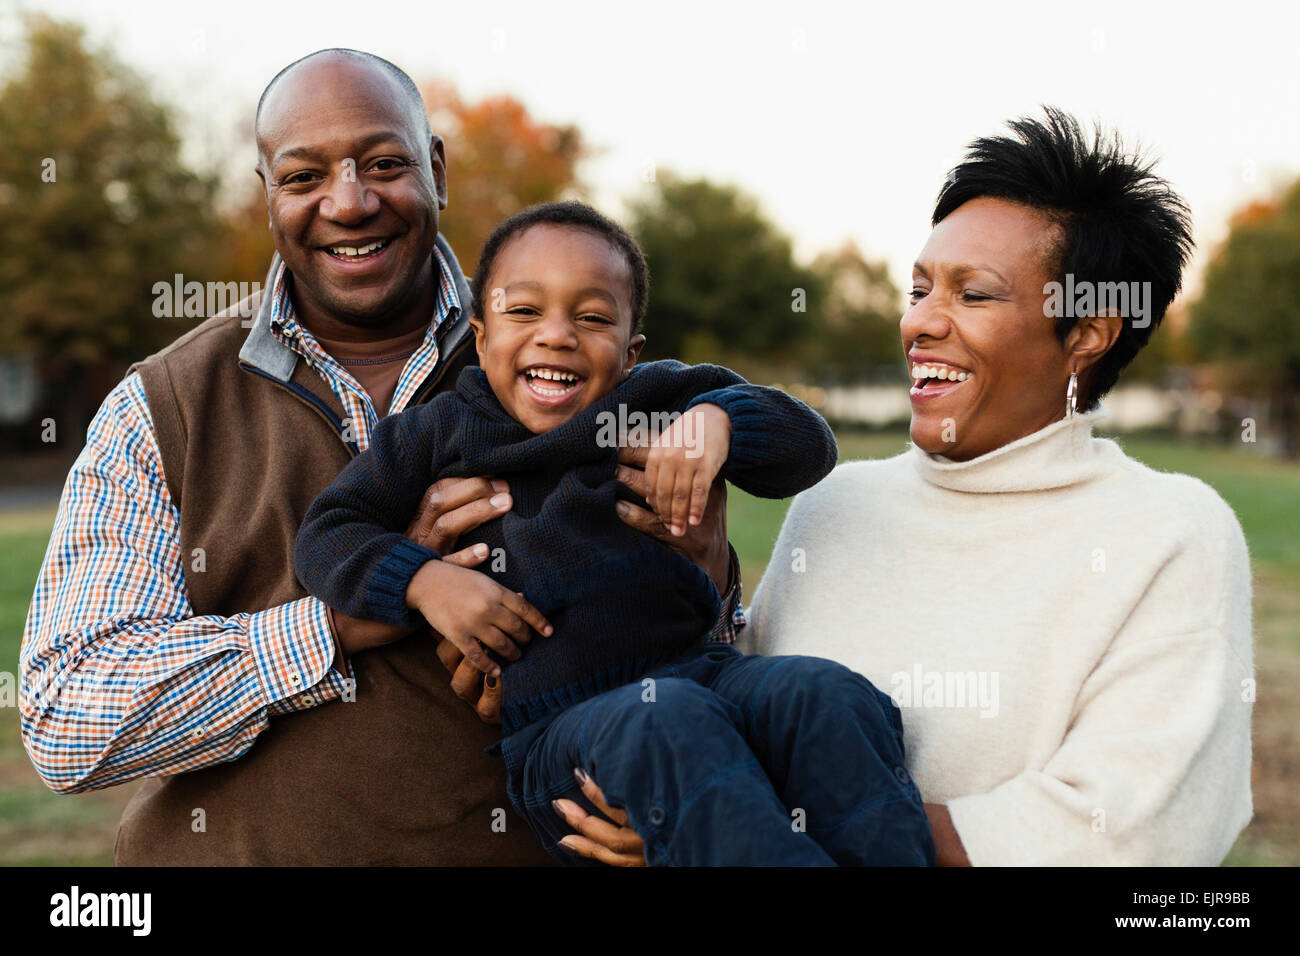 African American family playing in park Banque D'Images